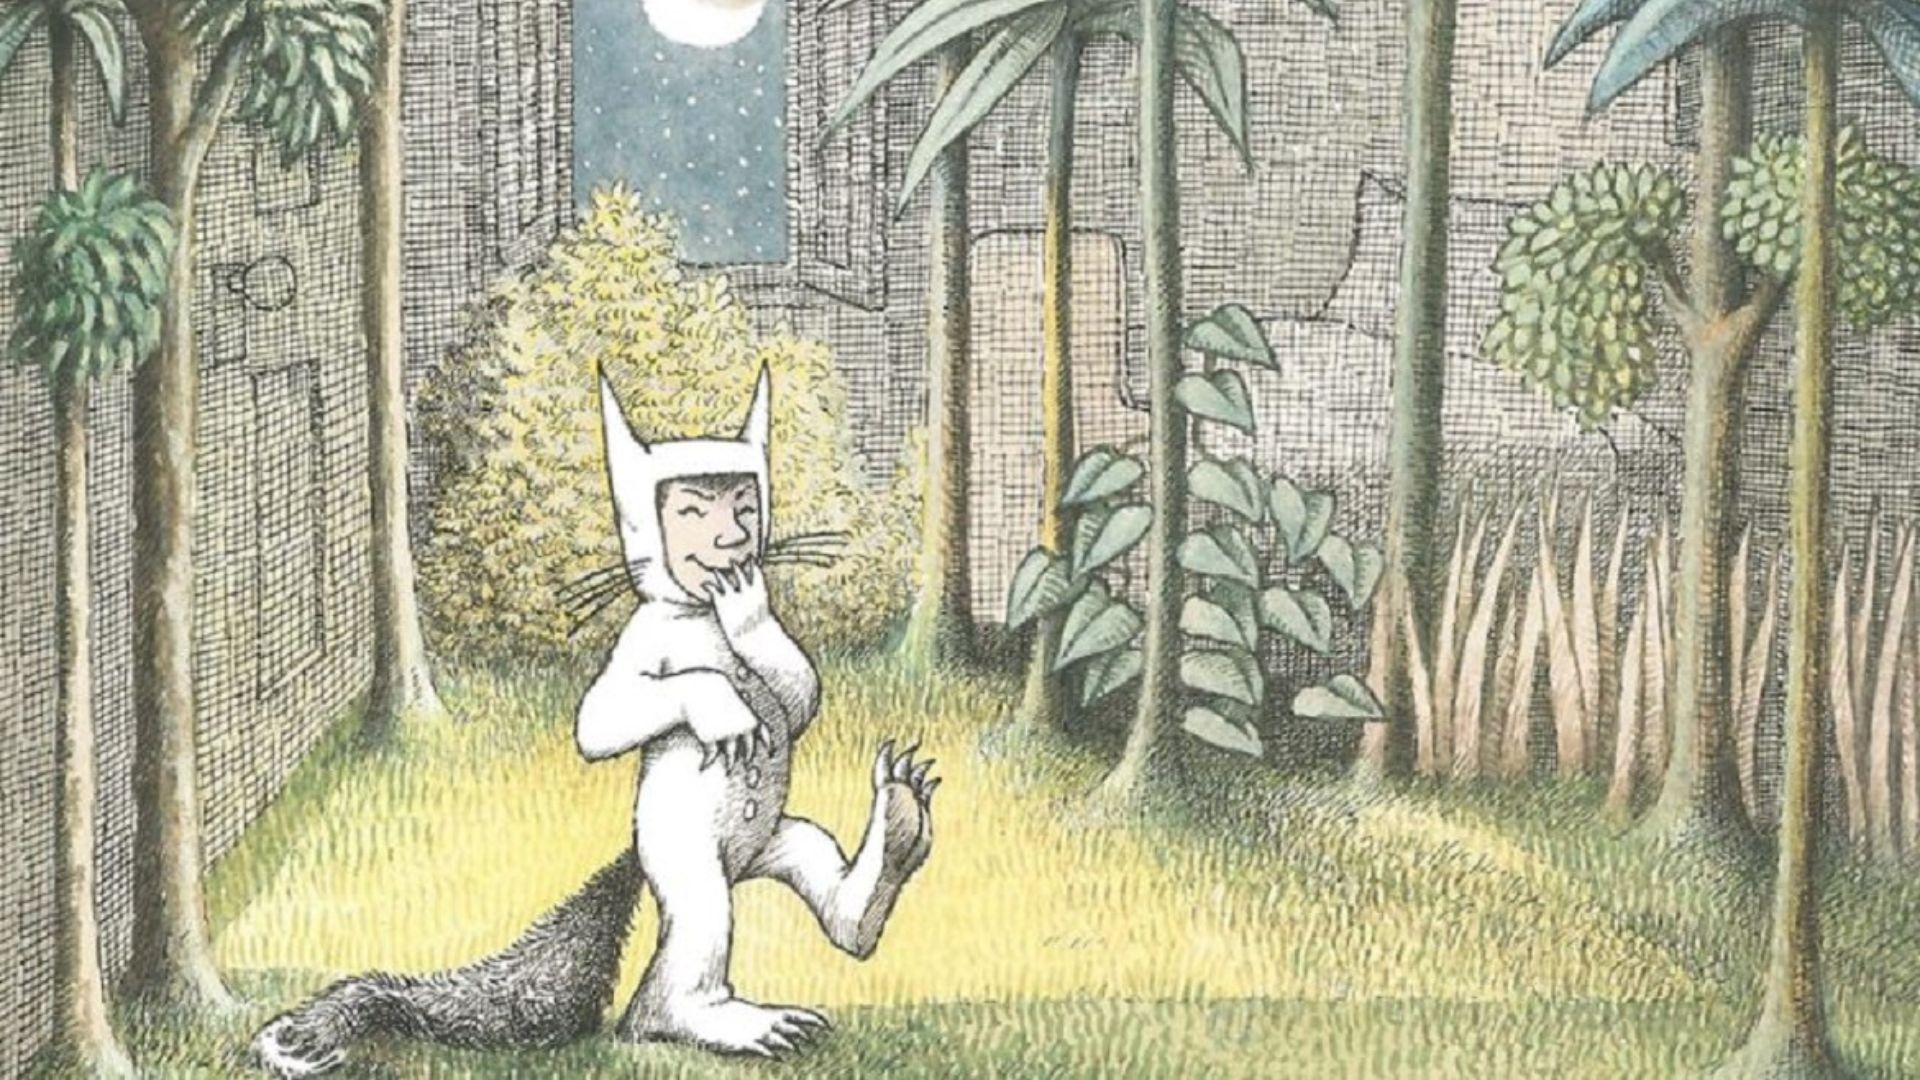 What Media was Used in Where the Wild Things Are